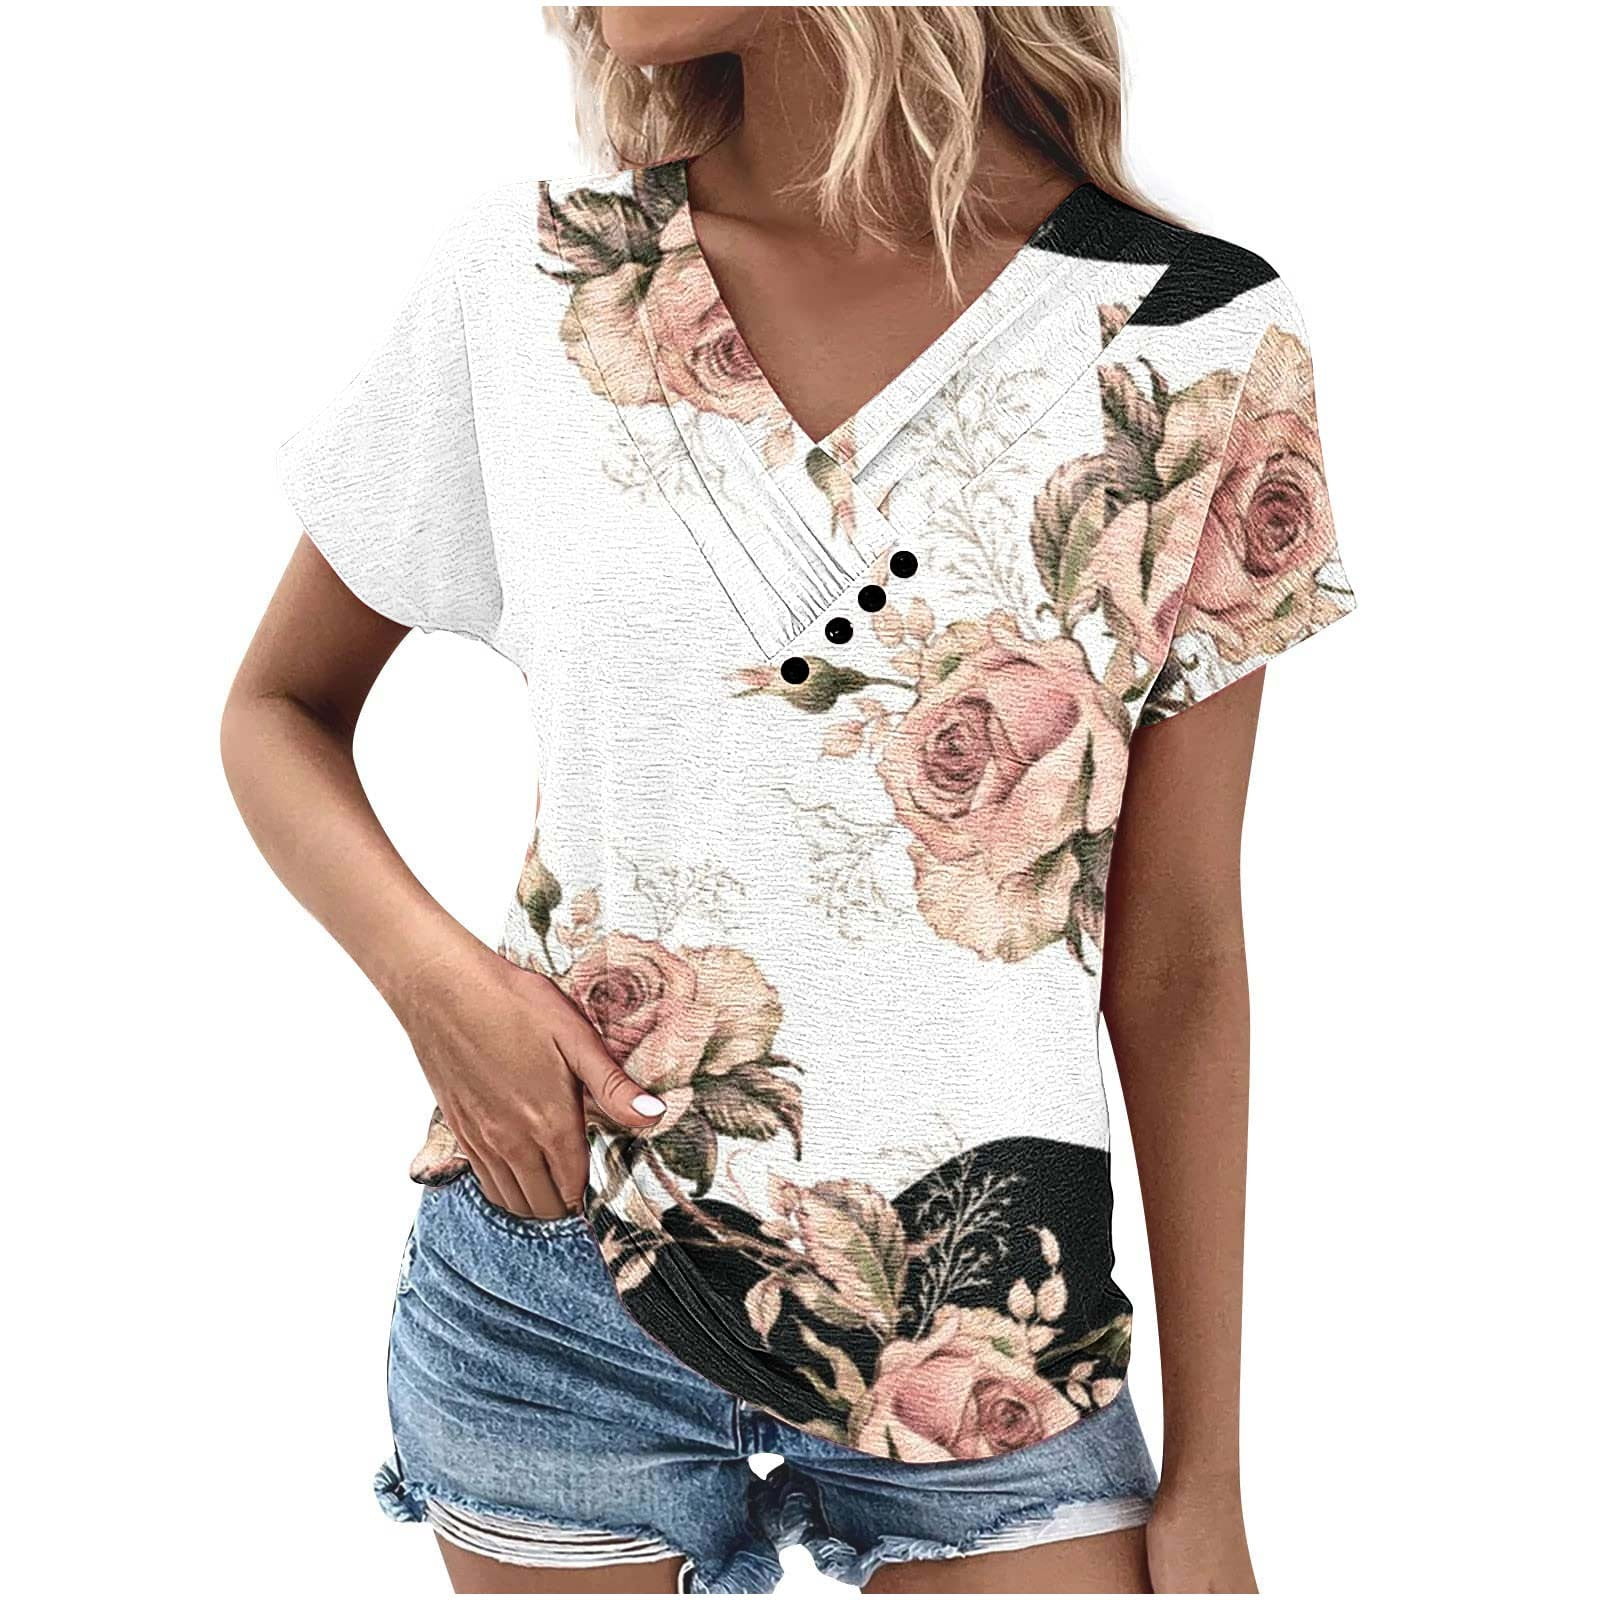 Yyeselk Going out Tops for Women Leisure Short Sleeves Sexy V-Neck Cozy ...